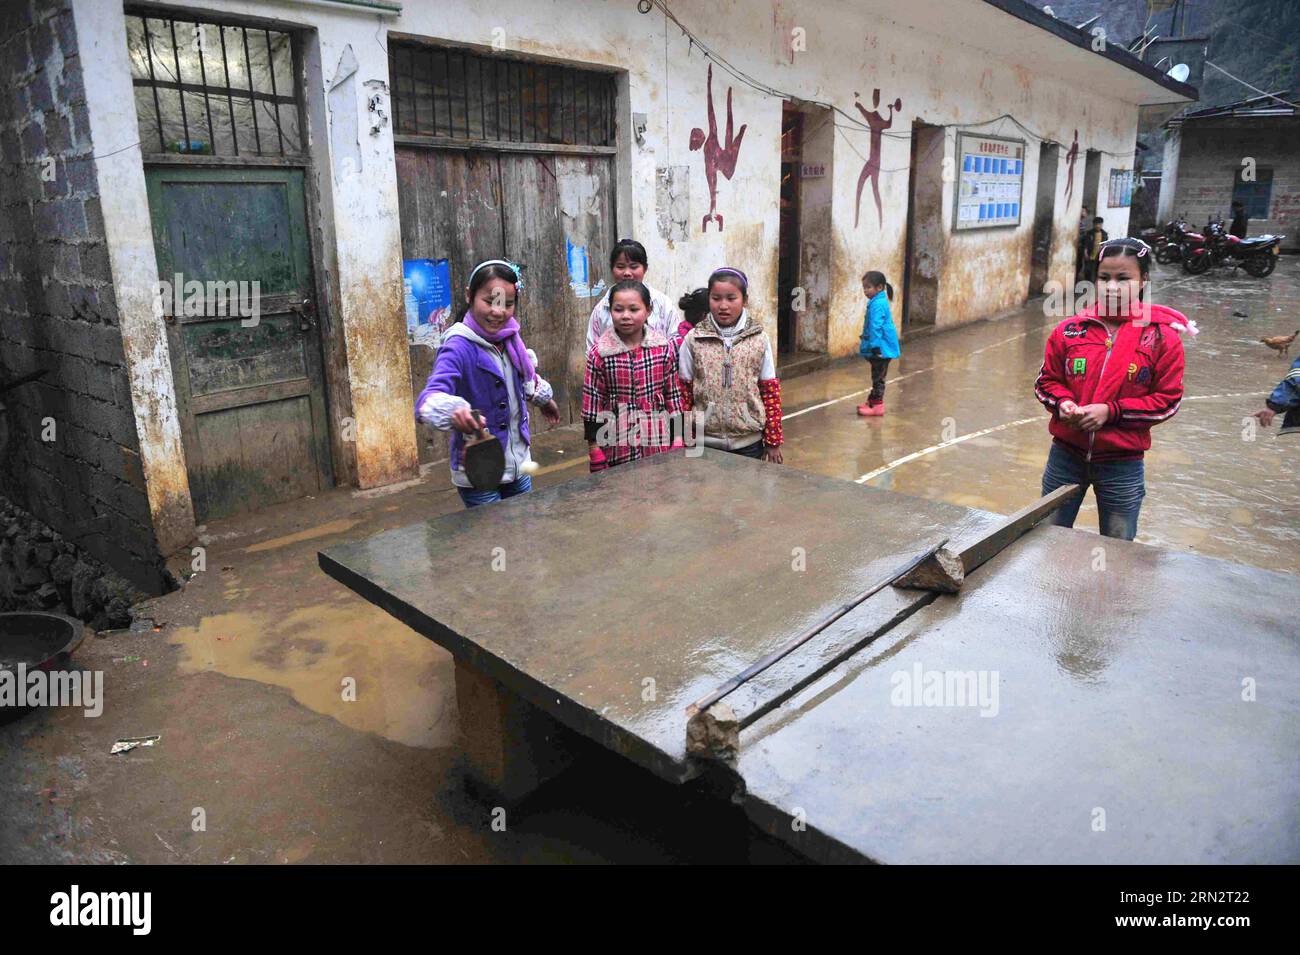 (150323) -- BANSHENG, March 23, 2015 -- Students play table tennis in front of their dormitory at Nongyong Primary School in Bansheng County, south China s Guangxi Zhuang Autonomous Region, Dec. 26, 2012. Nongyong Primary School was built in 1964. It is located in Bansheng County, a rural area of karst topography in Guangxi. Its initial school building consists of 12 one-storey houses. In 1990s, a two-storey teaching building and rough dormitory were built. There are about 250 students from all 22 villages of Nongyong. Every Monday, most of them have to walk over hills on their way to the scho Stock Photo